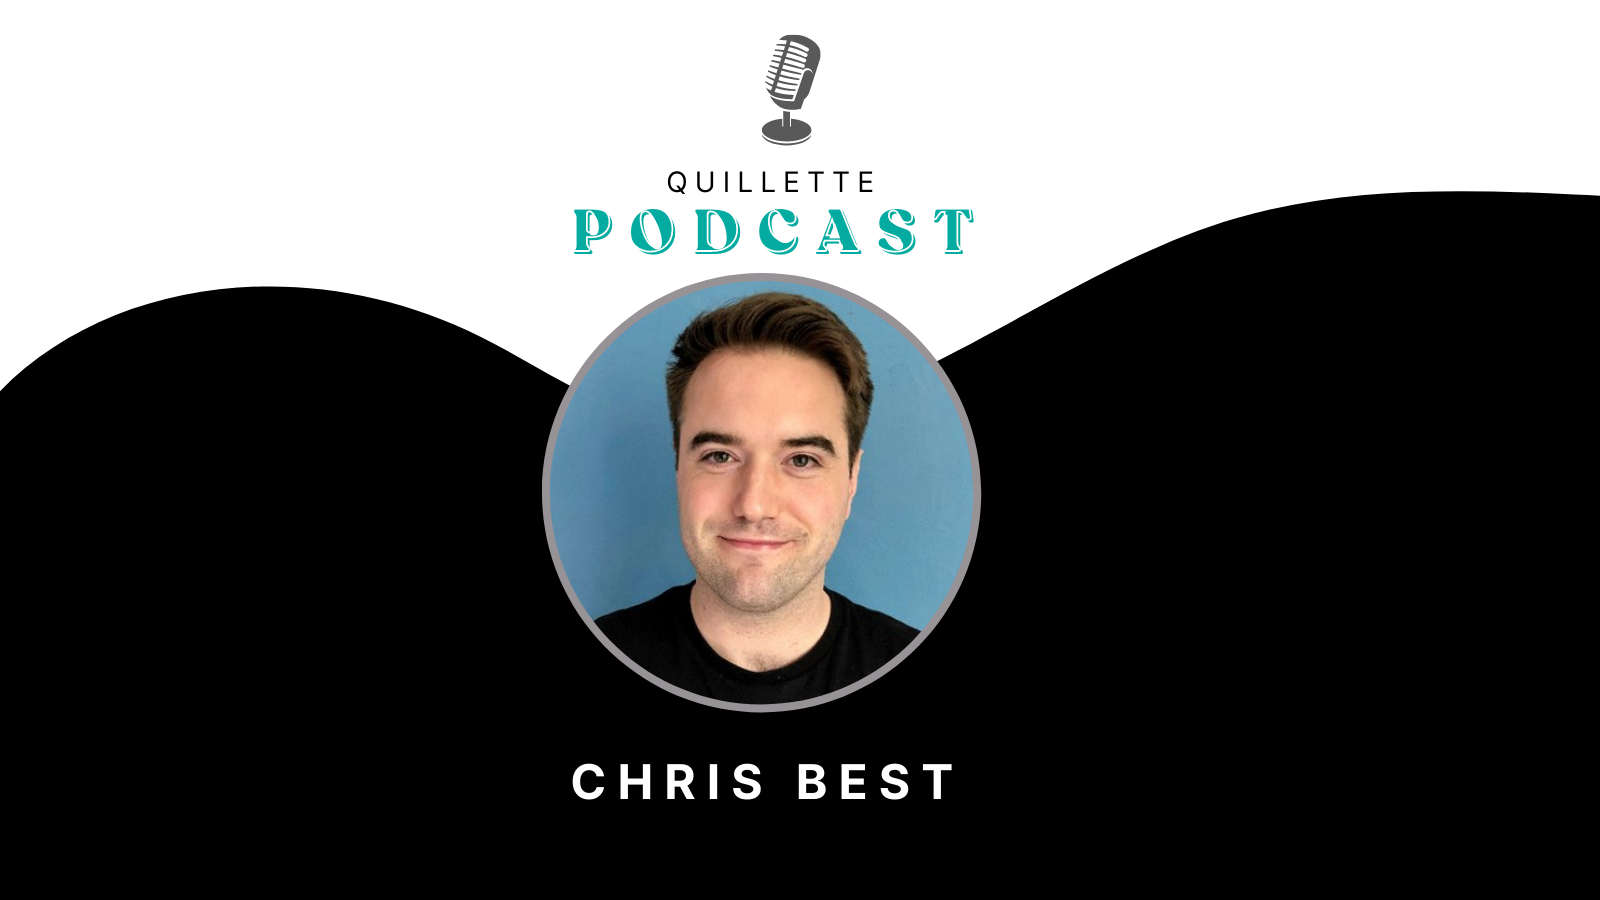 Quillette Podcast #181: Chris Best on Substack’s Commitment to Free Speech